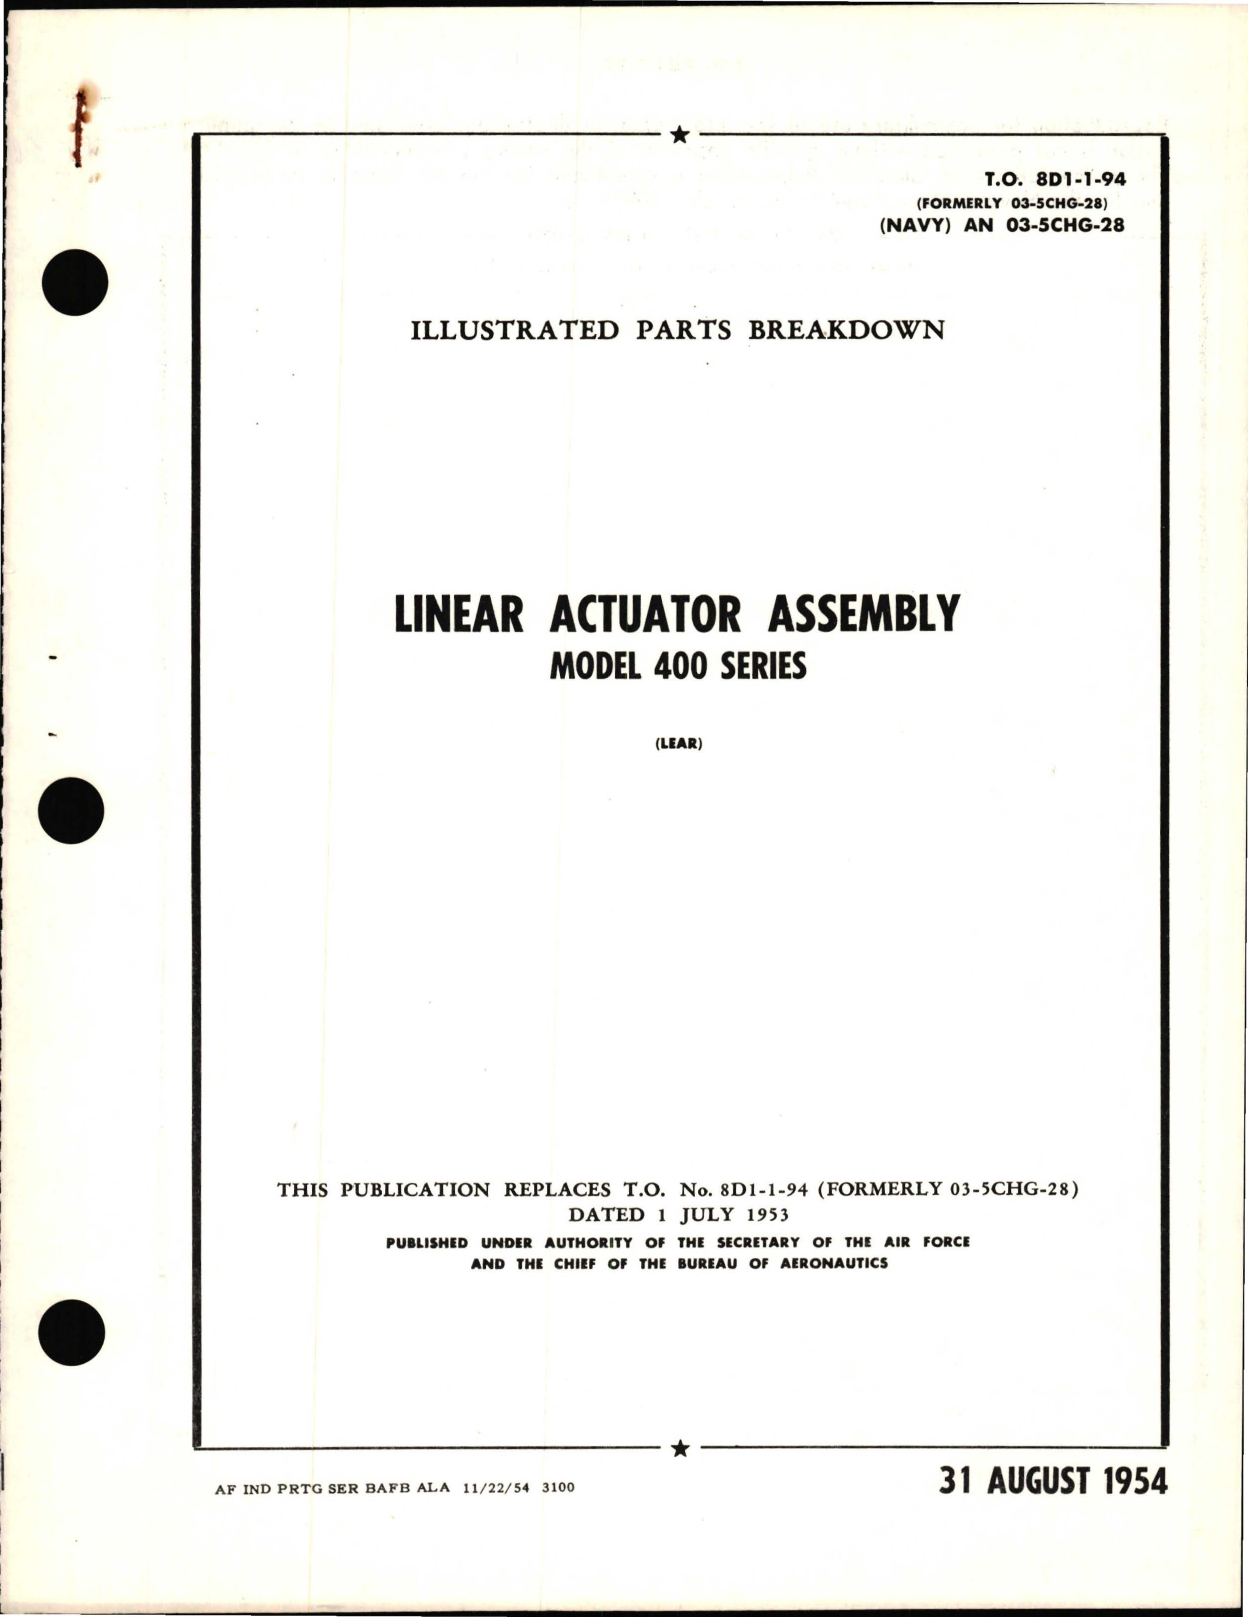 Sample page 1 from AirCorps Library document: Illustrated Parts Breakdown for Linear Actuator Assembly Model 400 Series